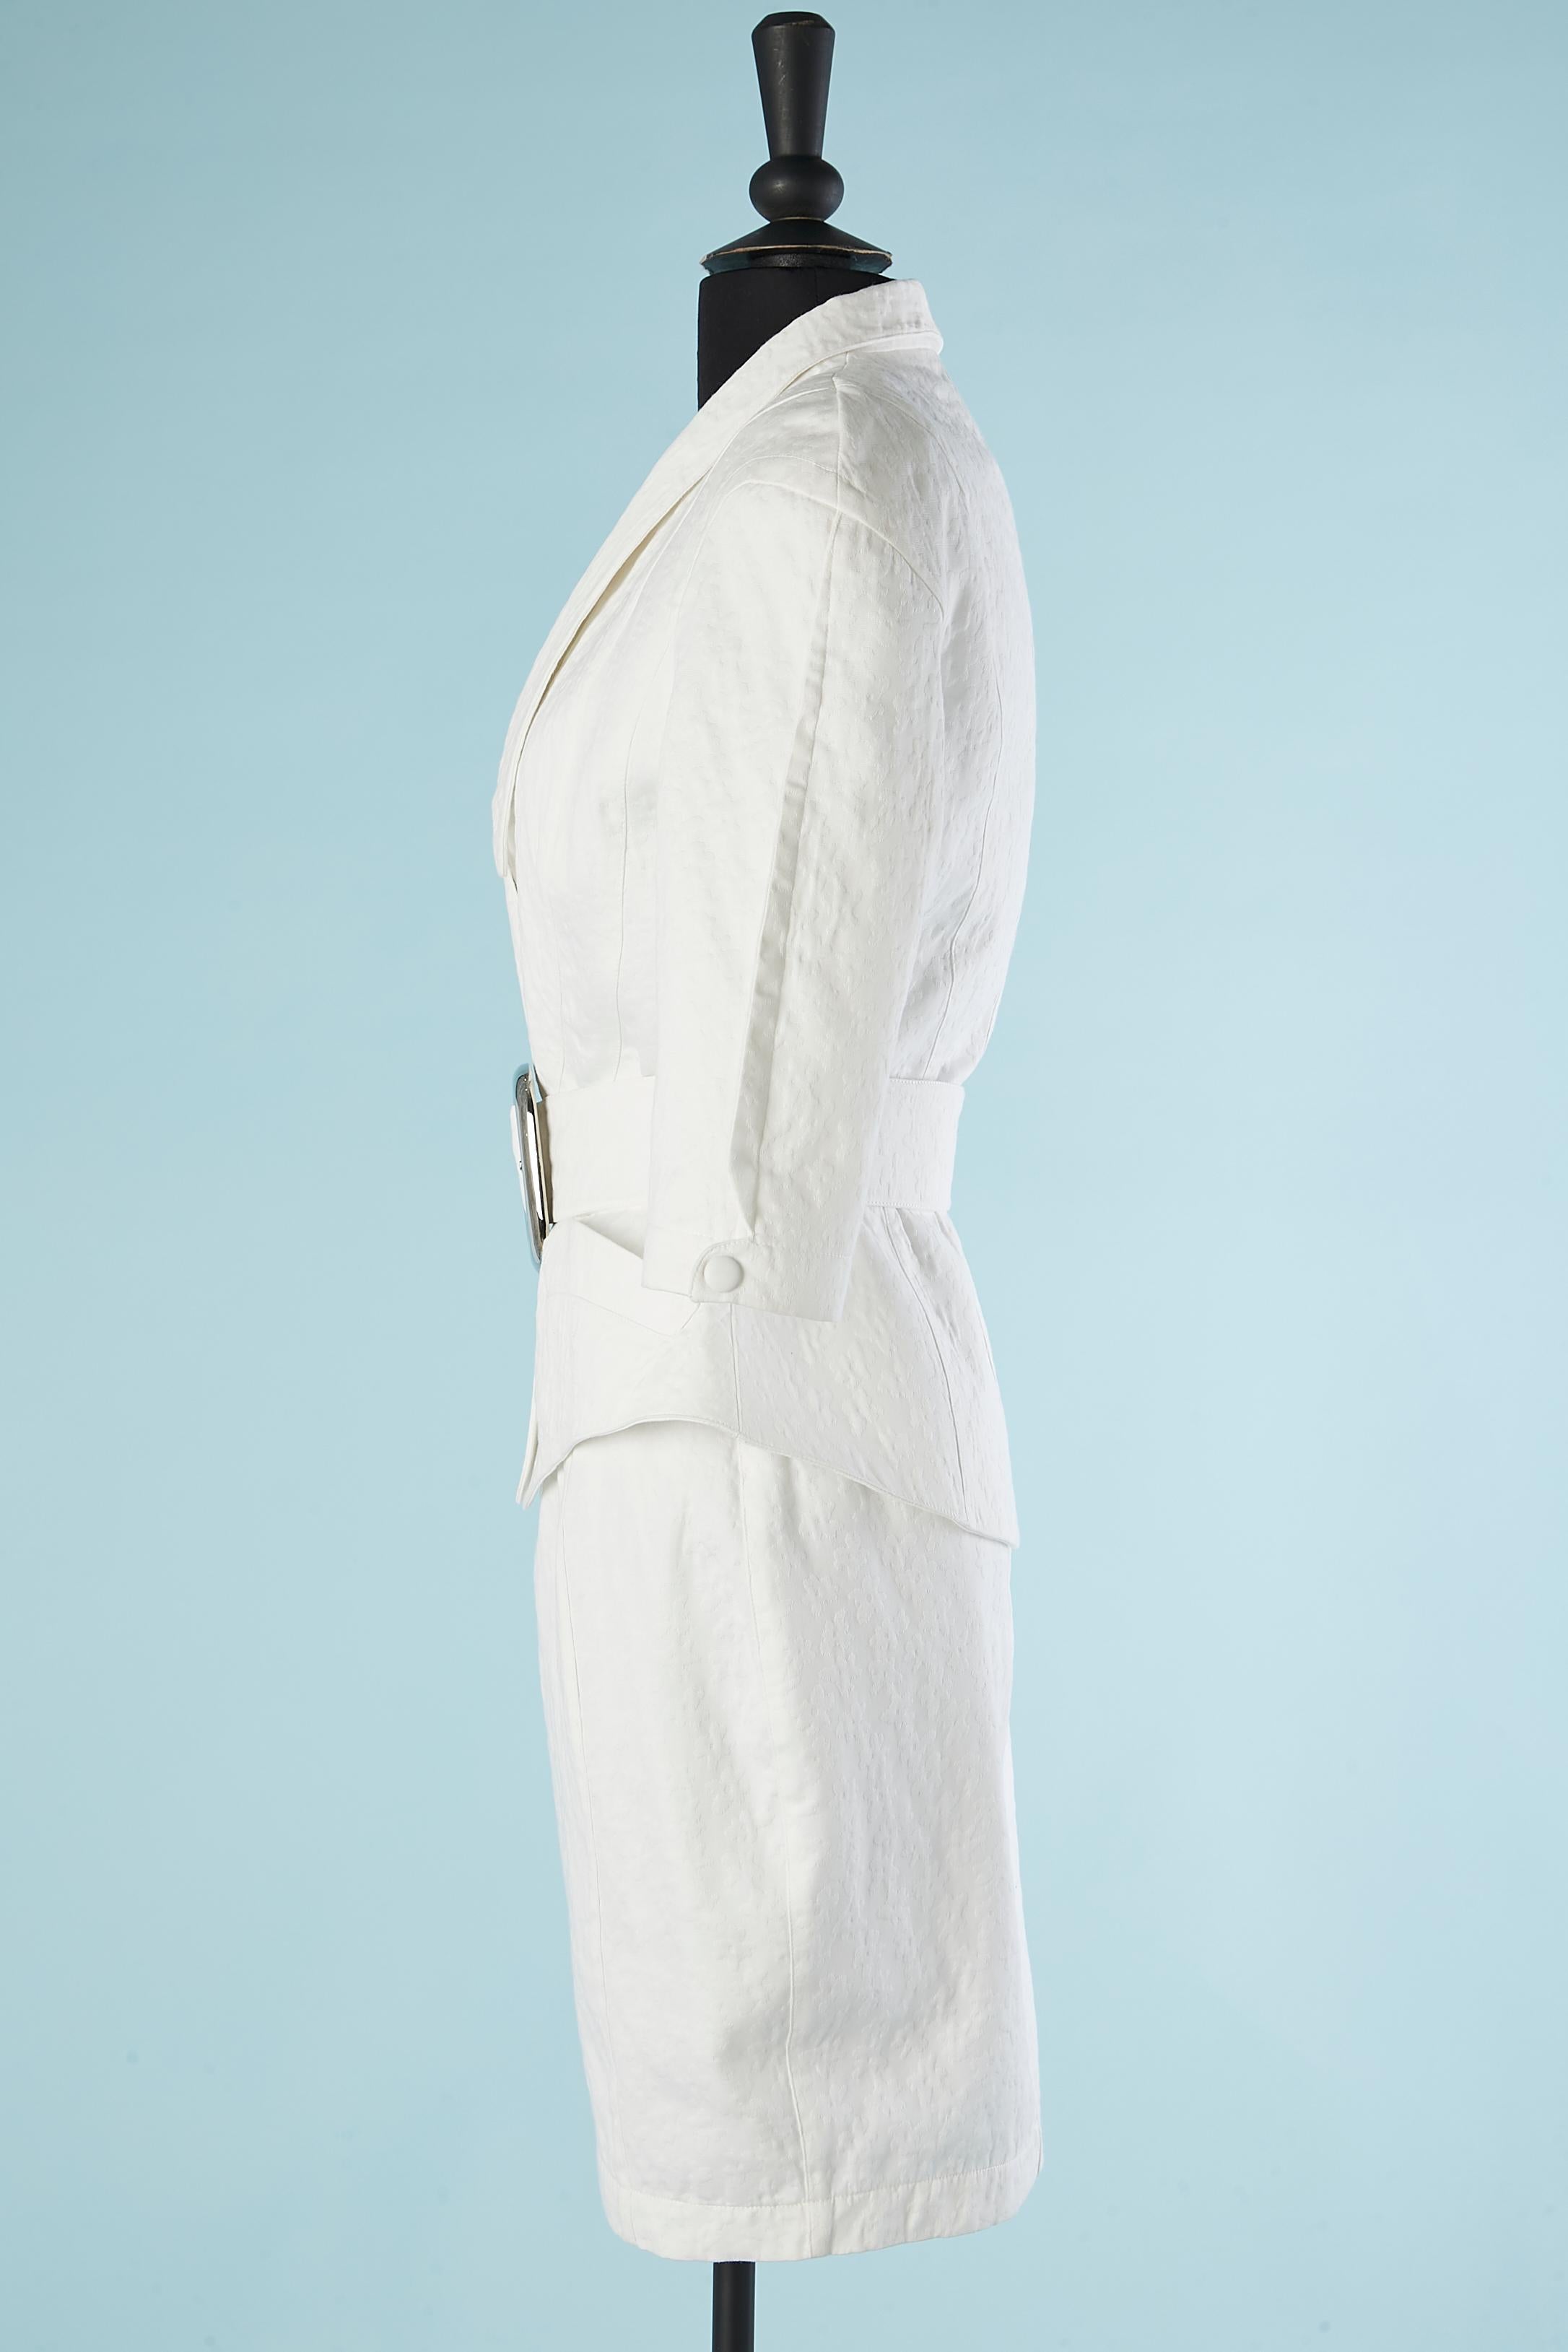 White cotton skirt-suit with relief flower pattern and belt Thierry Mugler  For Sale 2